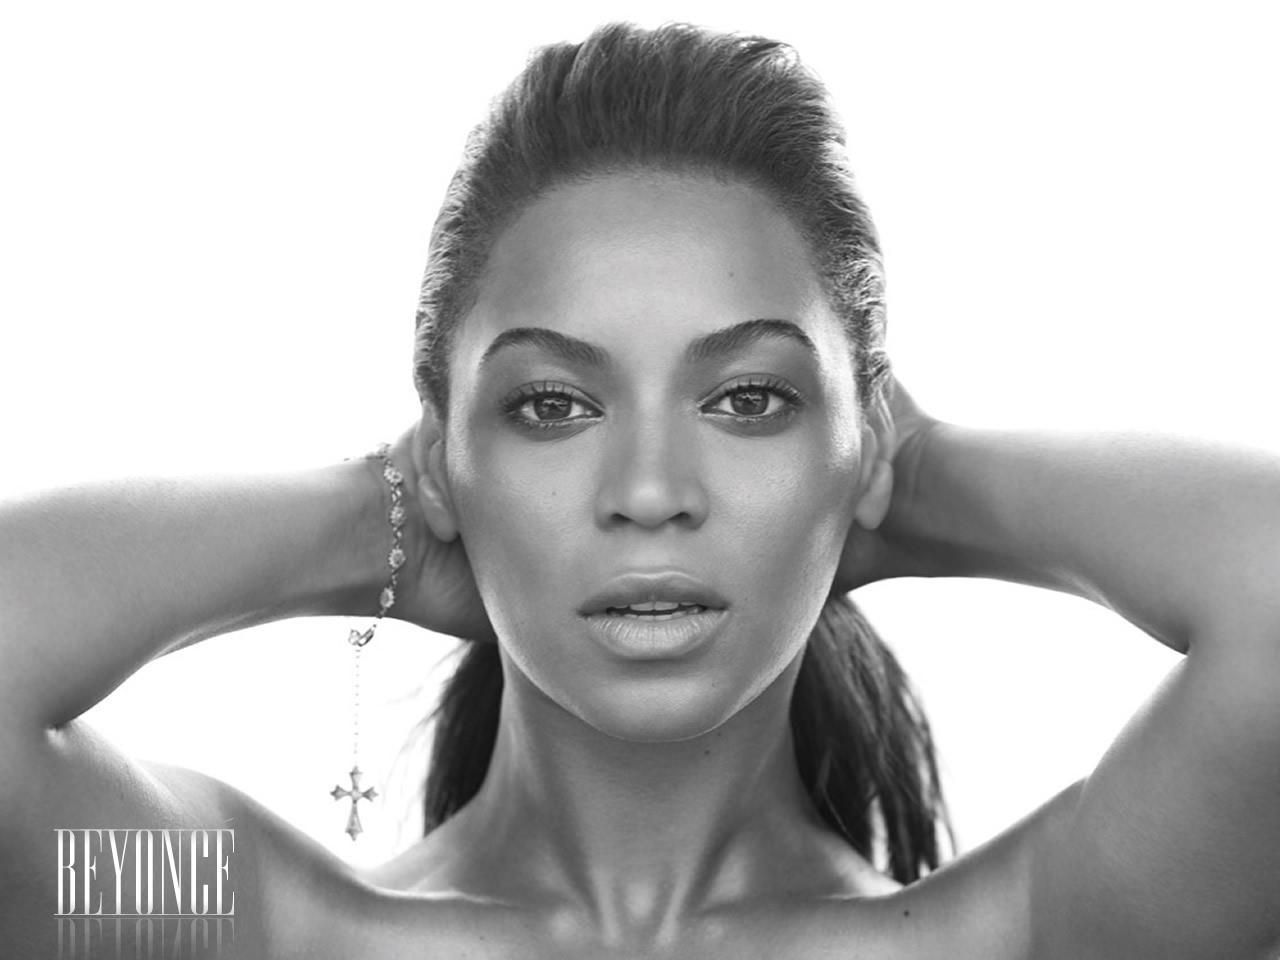 Beyonce Wallpaper Px Download For Mobile And Desktop - Beyonce Music Album  Covers - 1280x960 Wallpaper 